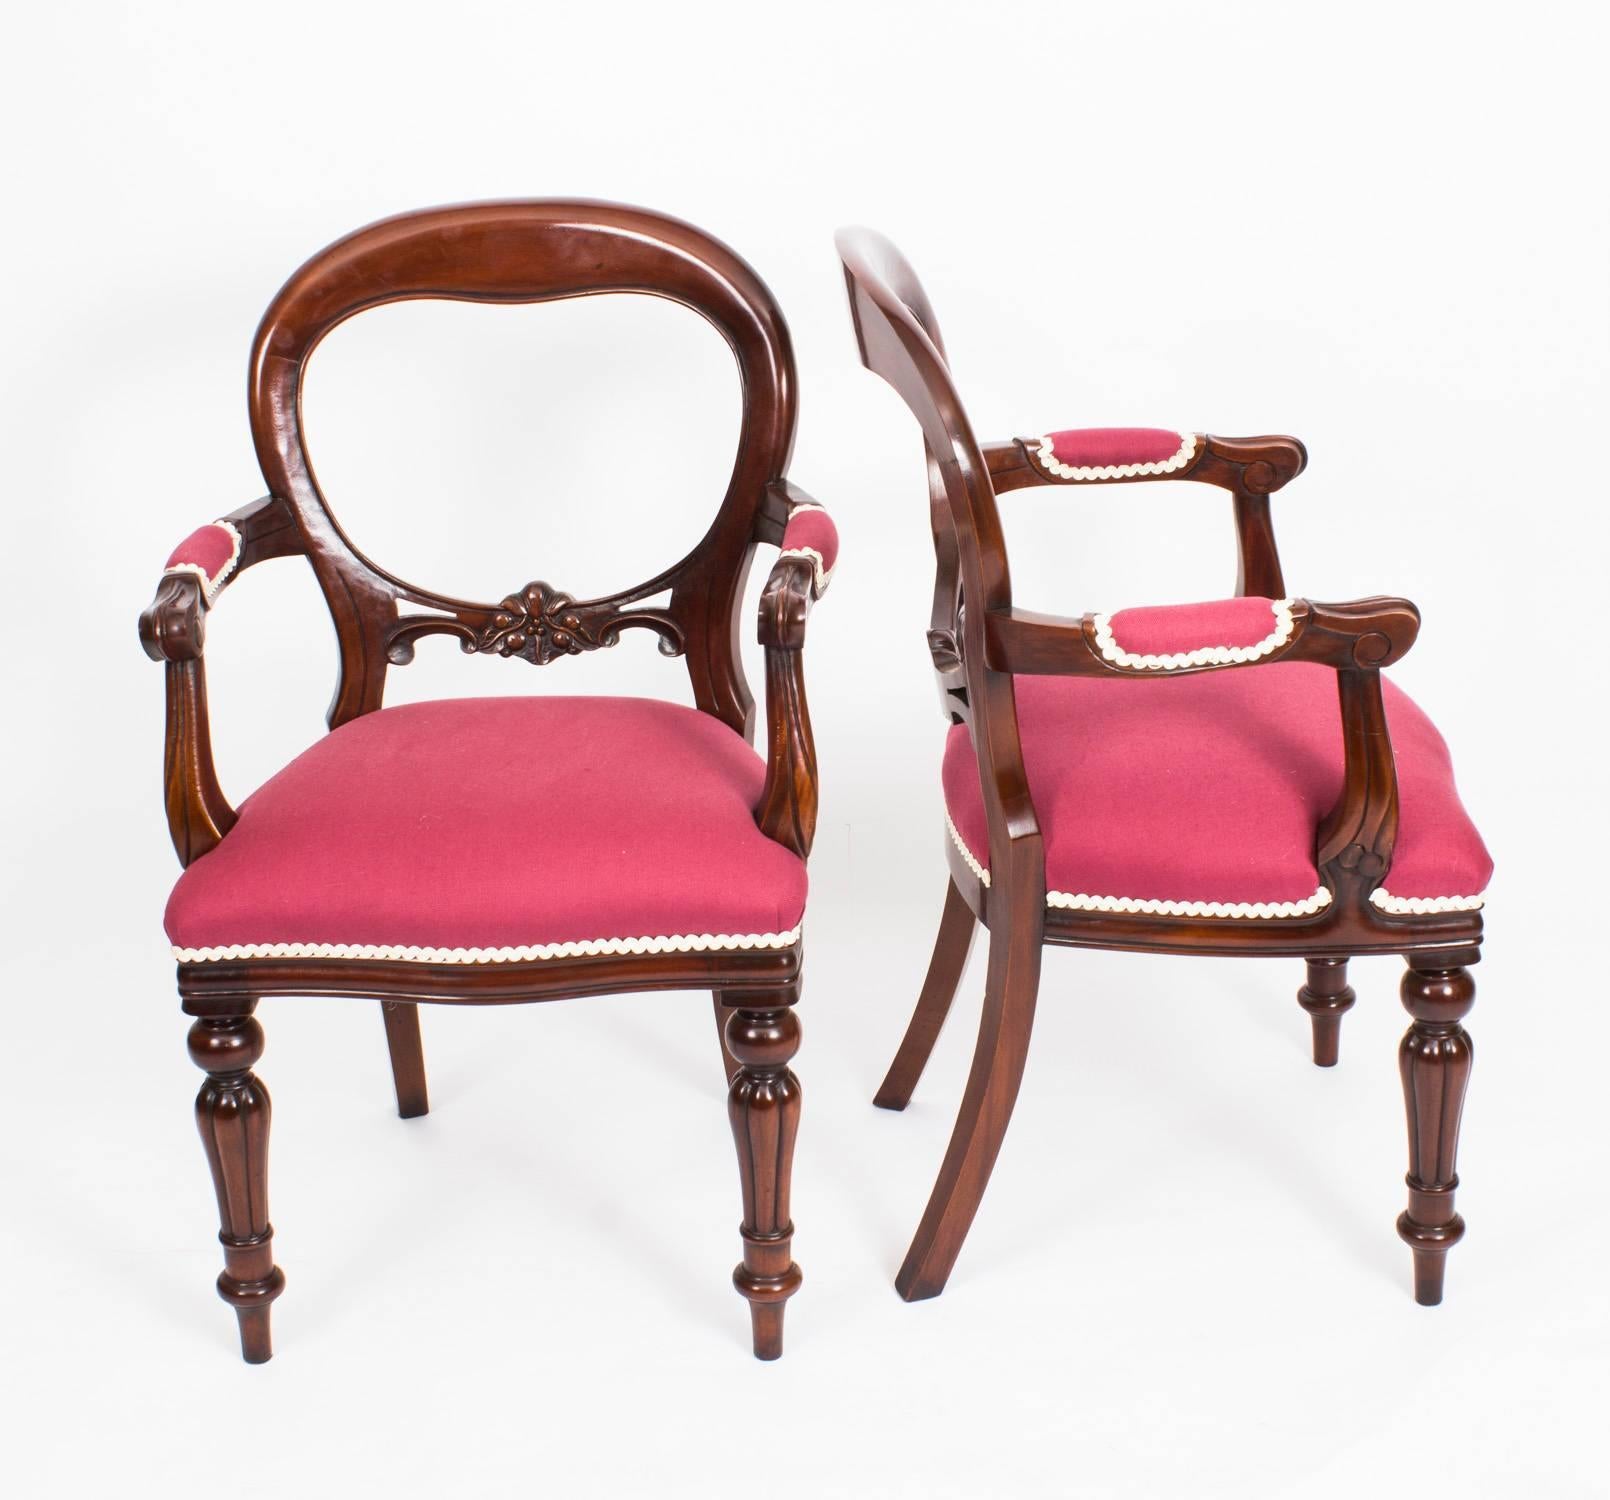 This is a beautiful set of 12 vintage Victorian style mahogany balloon back dining chairs, dating from the second half of the 20th century.

This set consists of ten chairs and two armchairs all skillfully carved from solid mahogany and